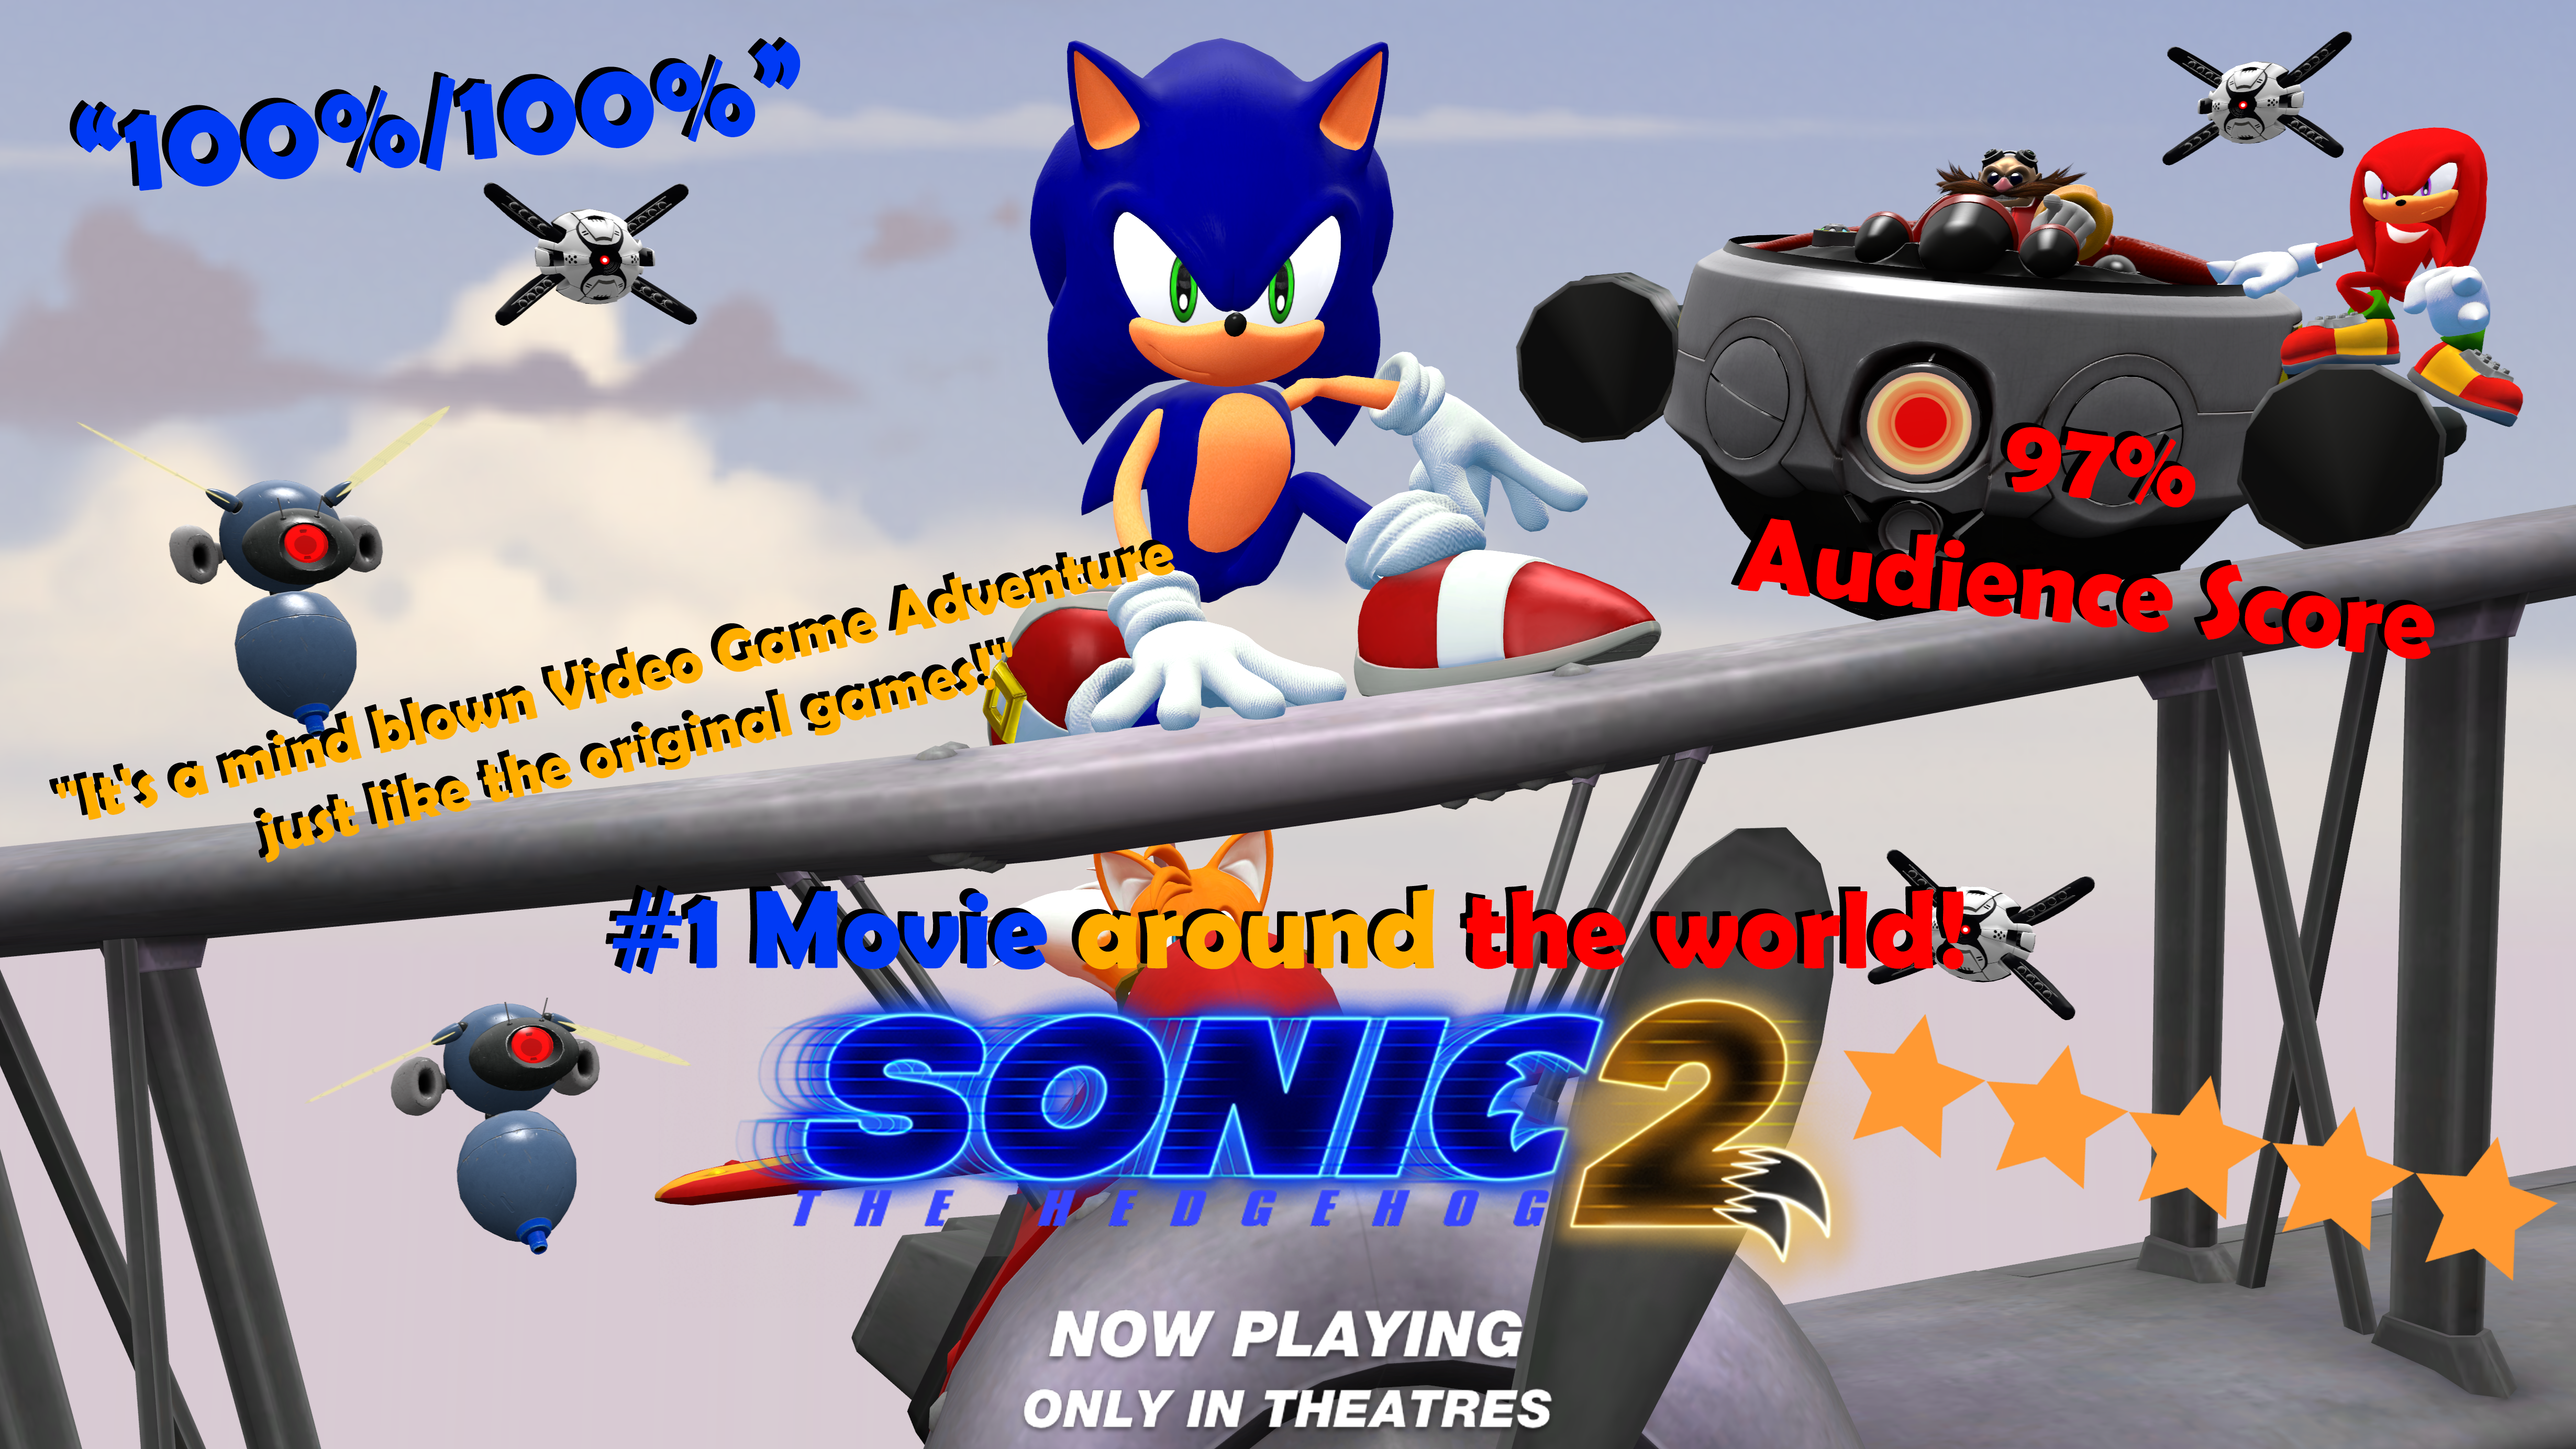 A 3rd Sonic The Hedgehog 2 Movie Poster by EdwardRBLX23 on DeviantArt